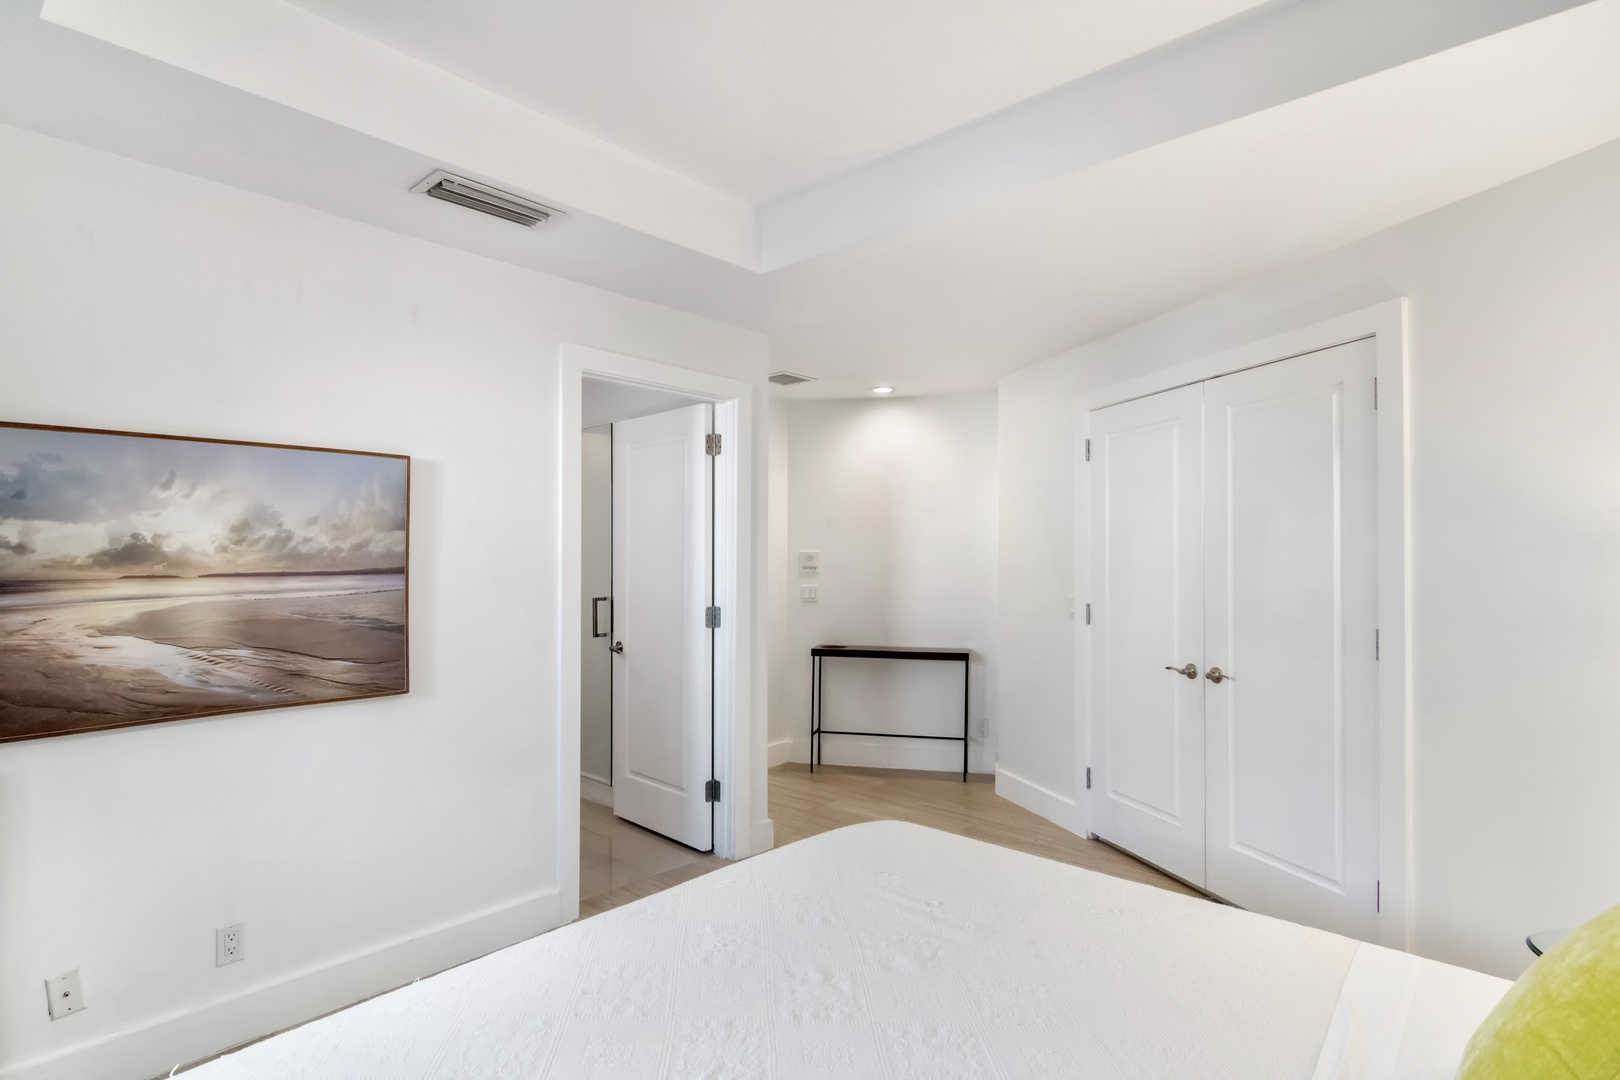 This polished 1st-floor queen suite includes a private ensuite & patio access